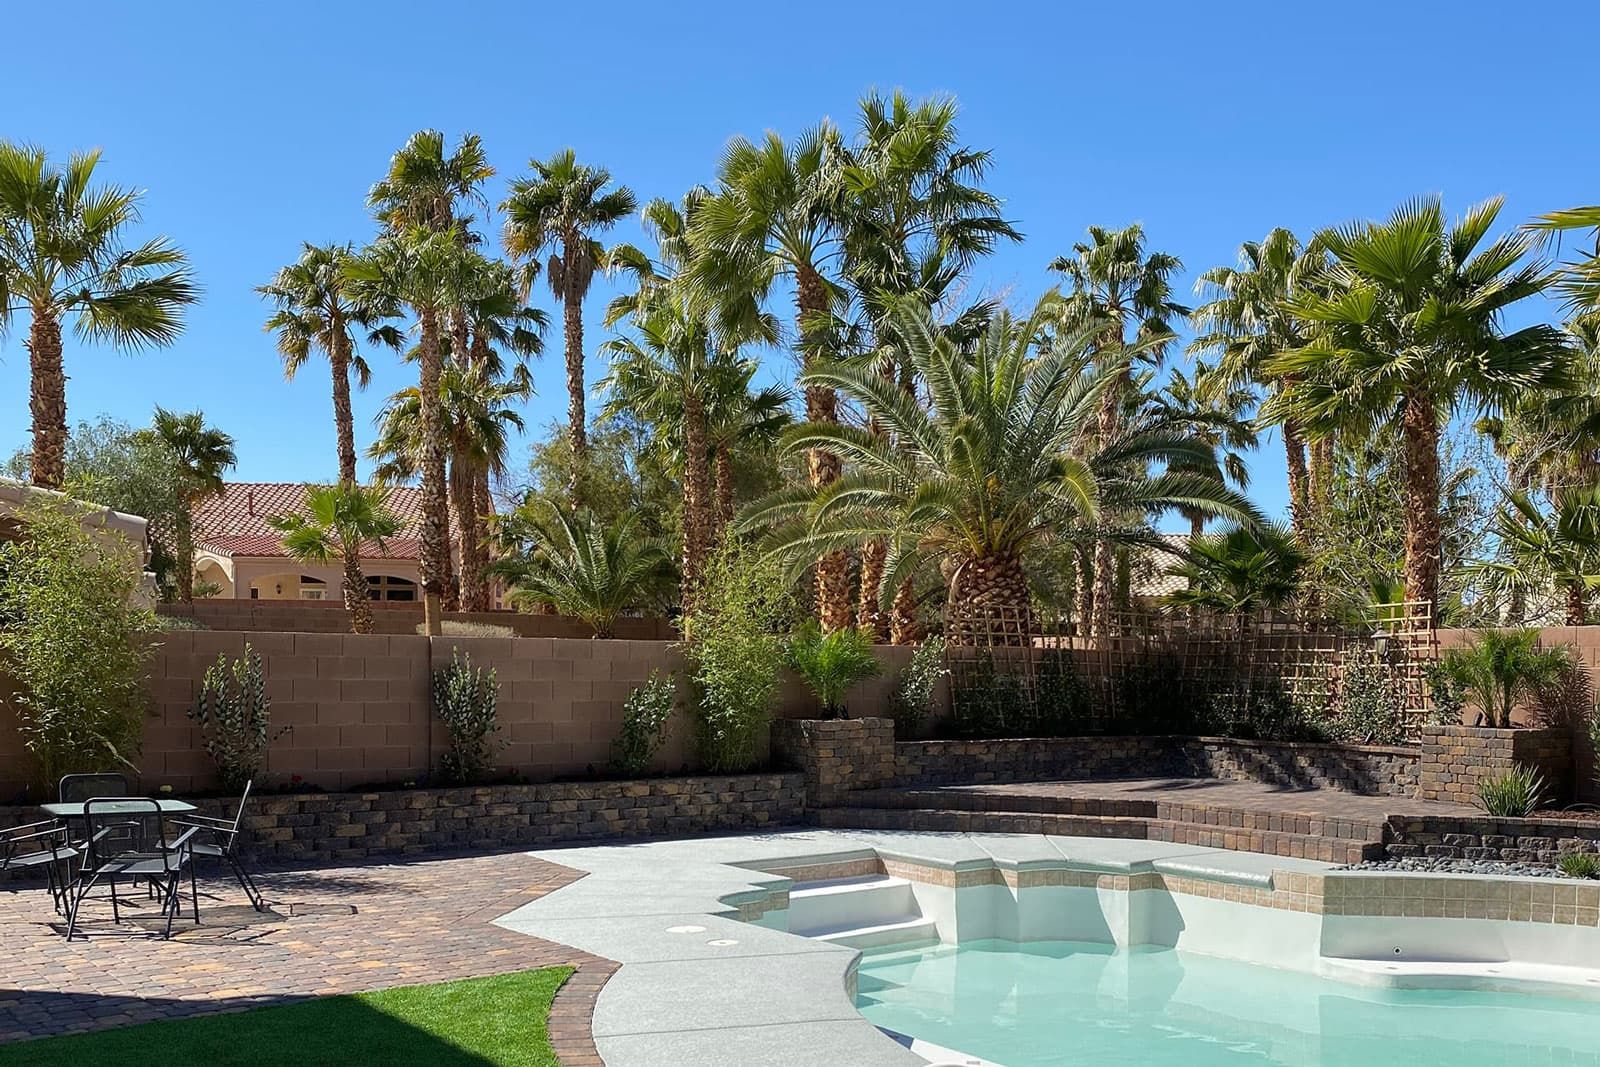 A Las Vegas Home Backyard Pool Area With Pavers, Hardscape Elements And Pruned Palm Trees.